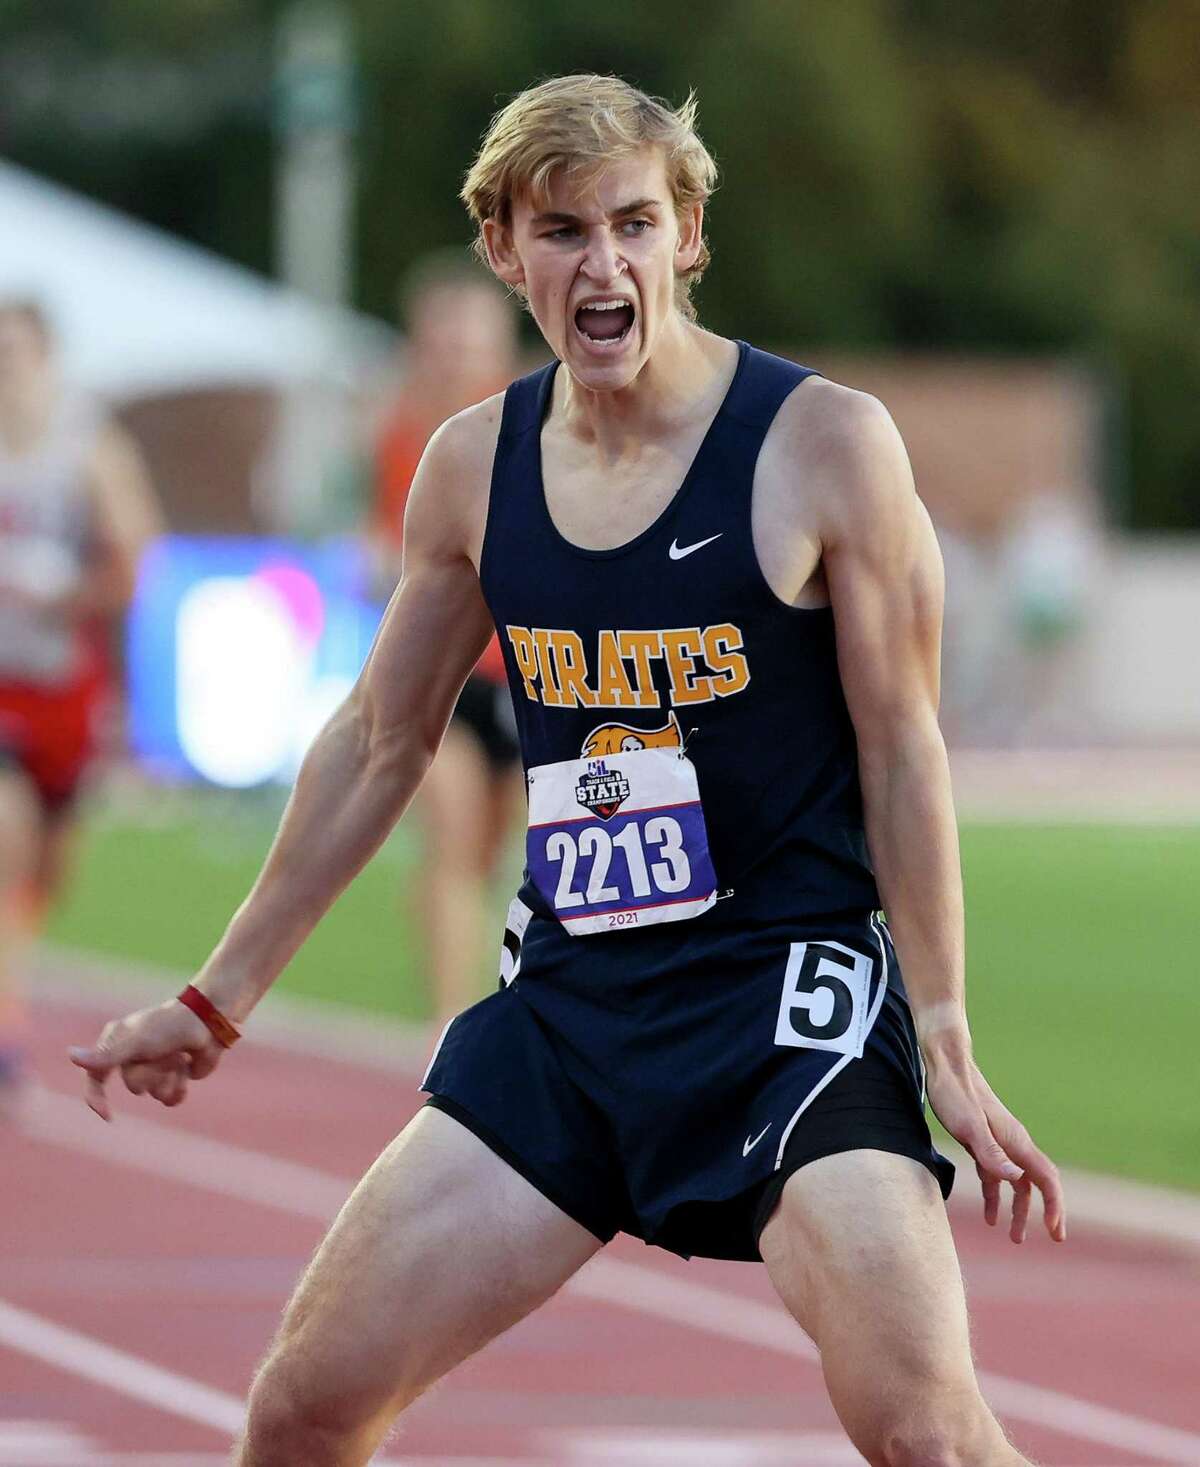 Poth's Wyatt Hoover reacts after finishing third in the 3A boys 1600-meter run during the UIL state track and field championships at Mike A. Myers Stadium in Austin on Thursday, May 6, 2021. Hoover ran a 4:27.94.